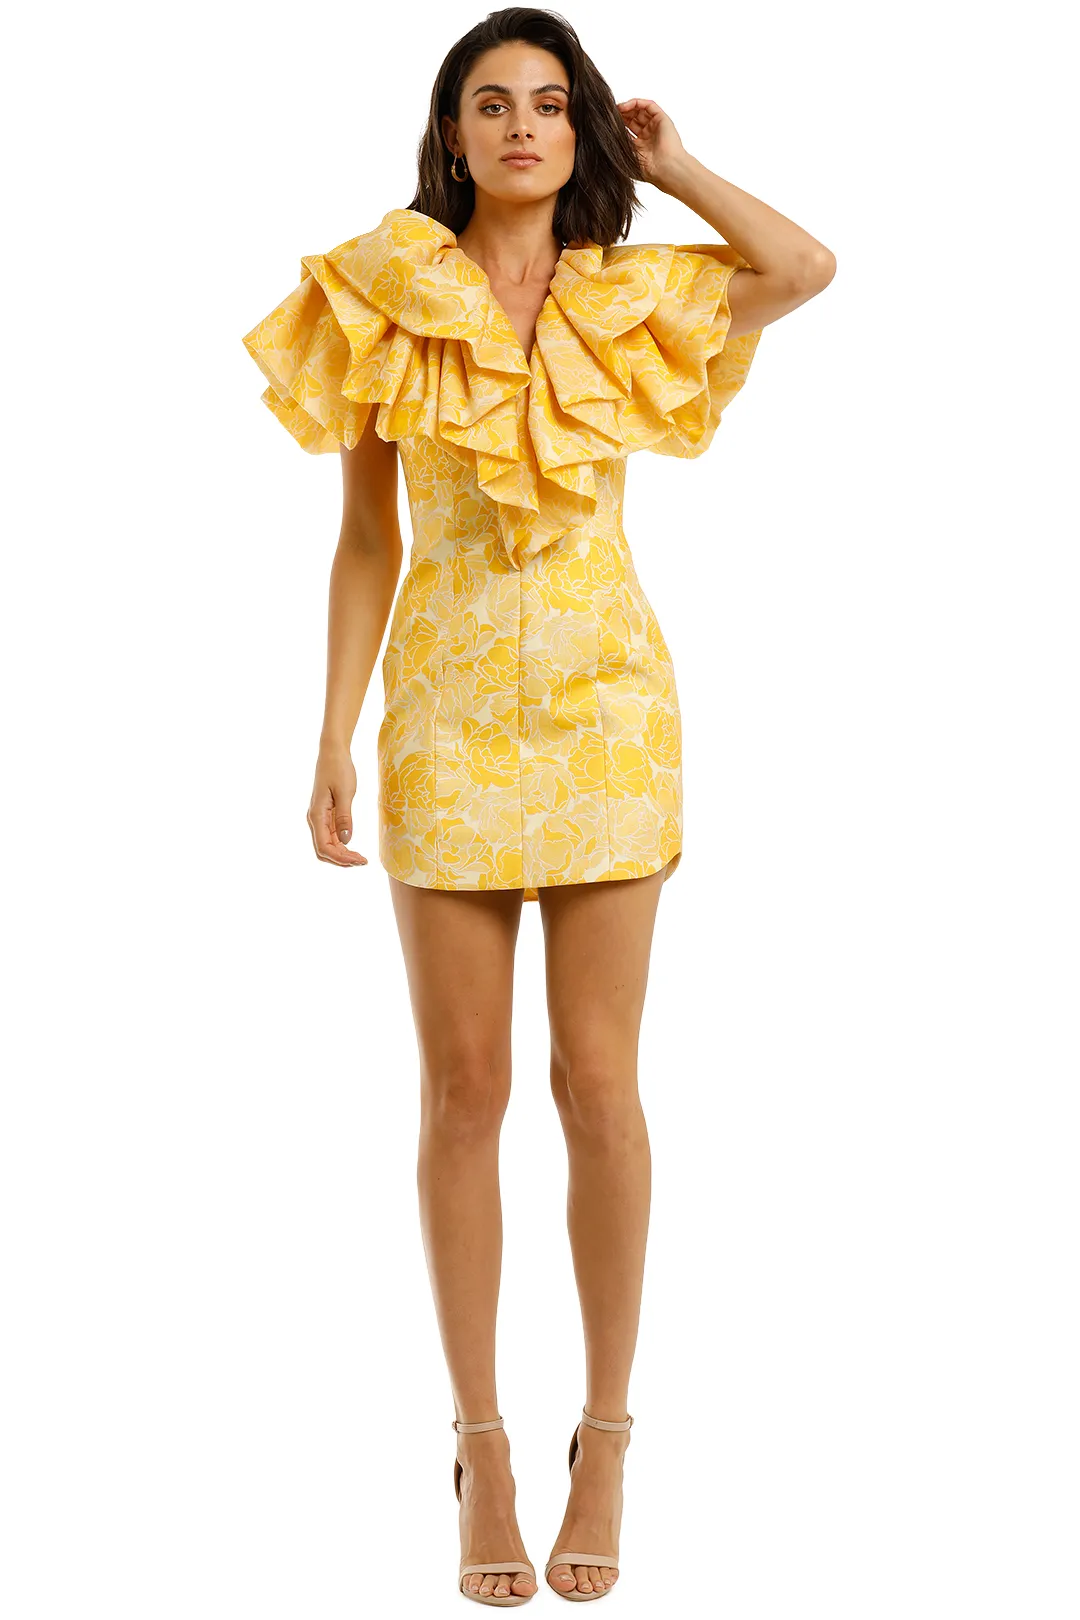 Beston Dress Lemon by Acler for party events